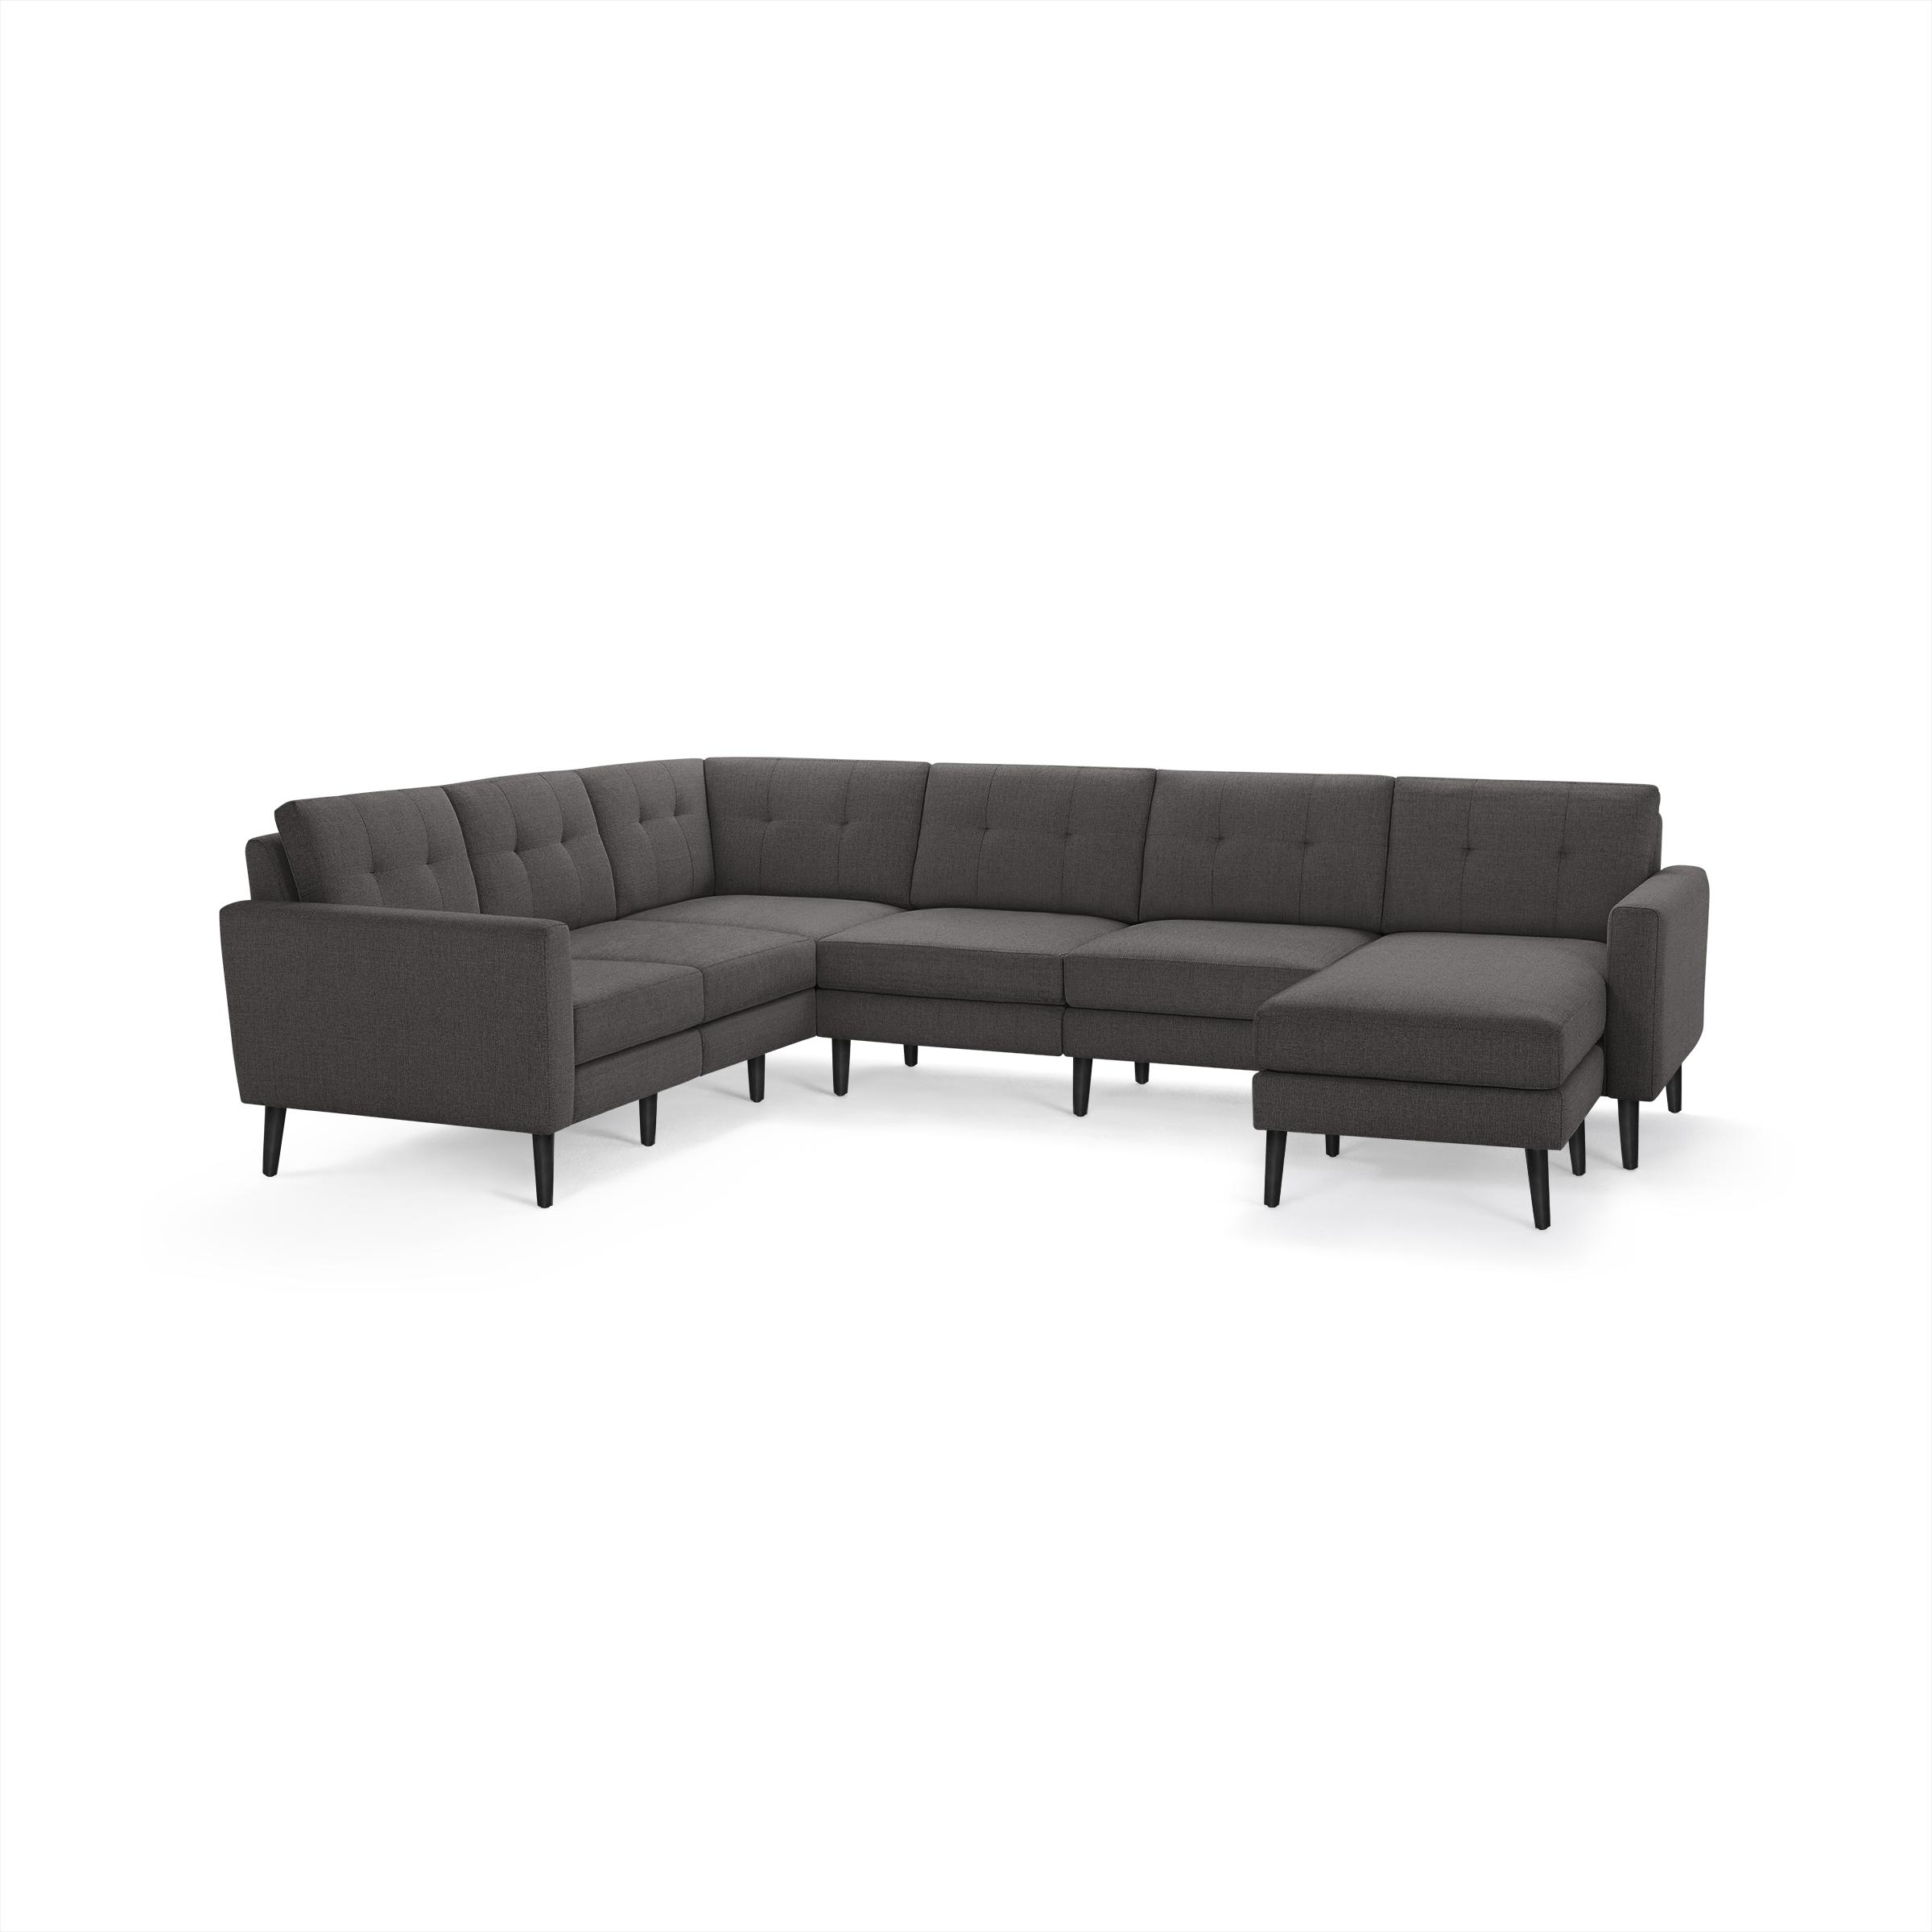 Nomad 6-Seat Corner Sectional with Chaise in Charcoal, Leg Finish: EbonyLegs - Image 1